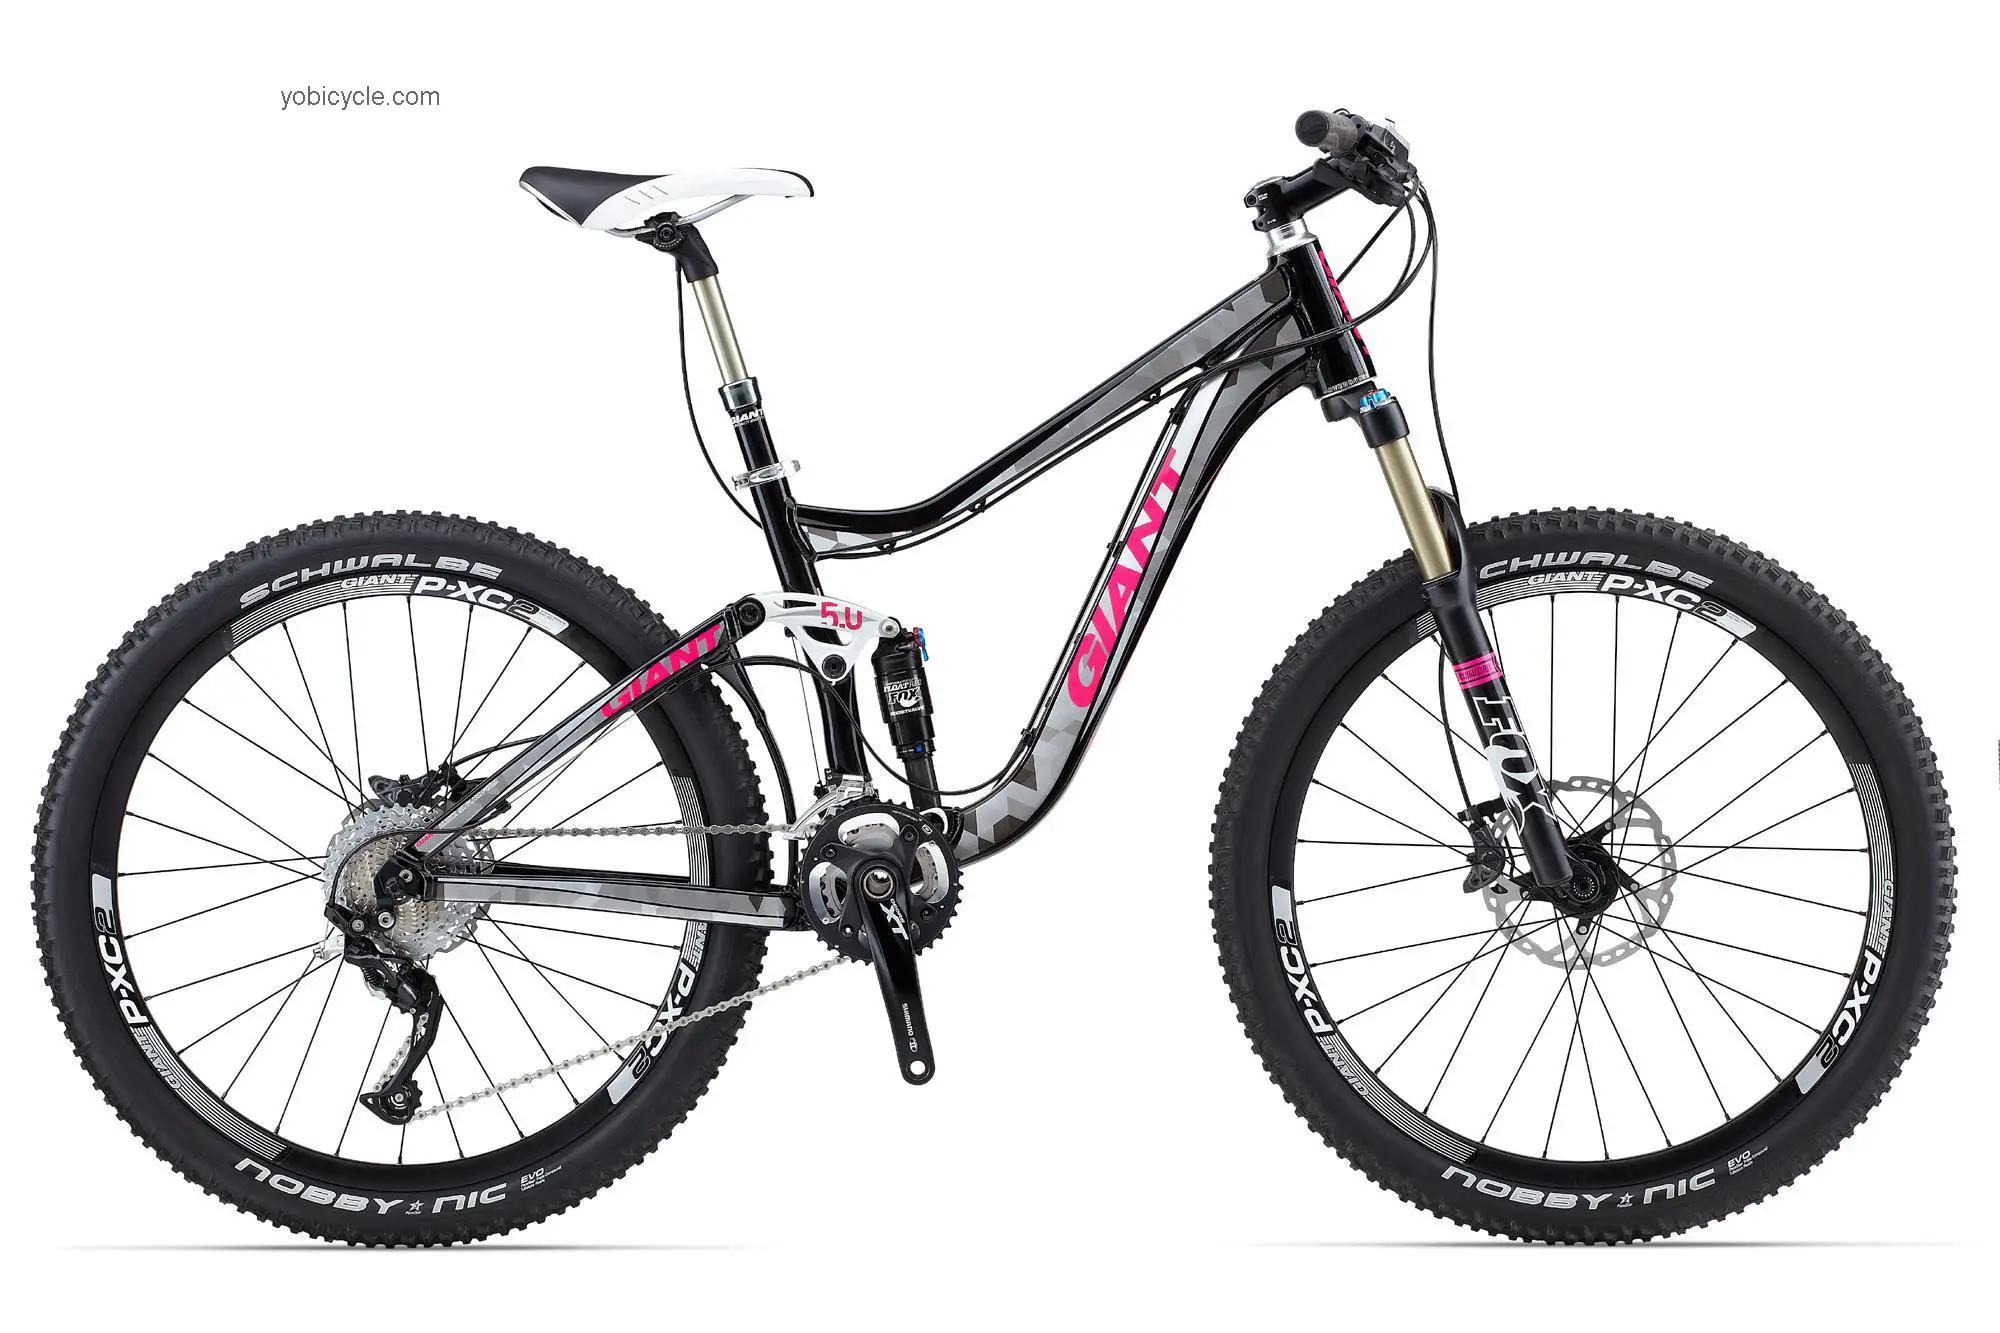 Giant Trance X1 W 2013 comparison online with competitors